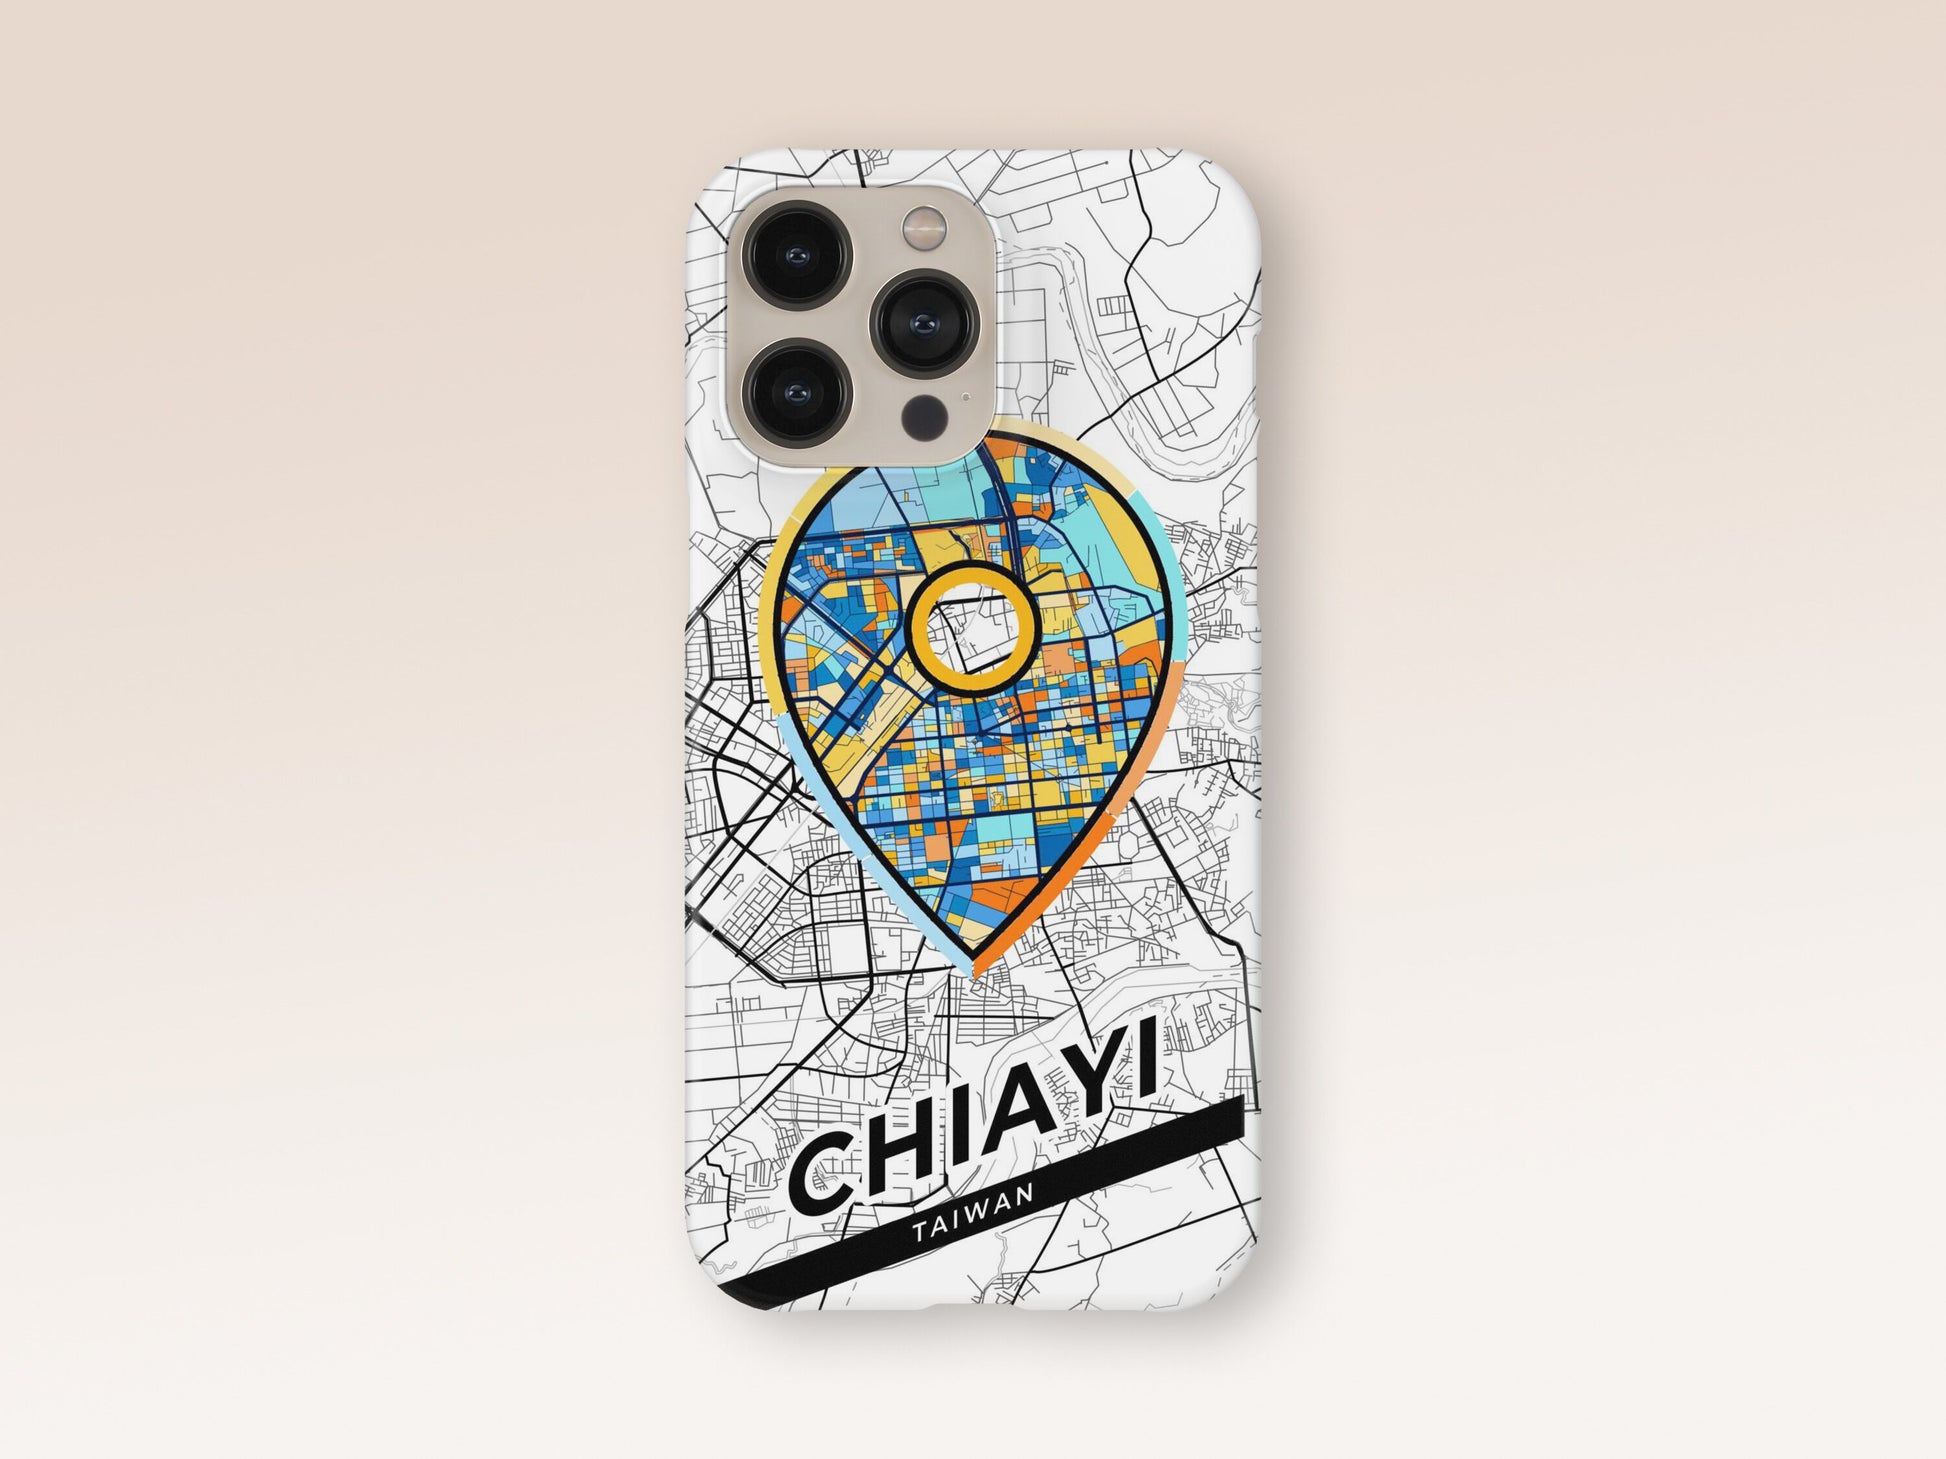 Chiayi Taiwan slim phone case with colorful icon. Birthday, wedding or housewarming gift. Couple match cases. 1